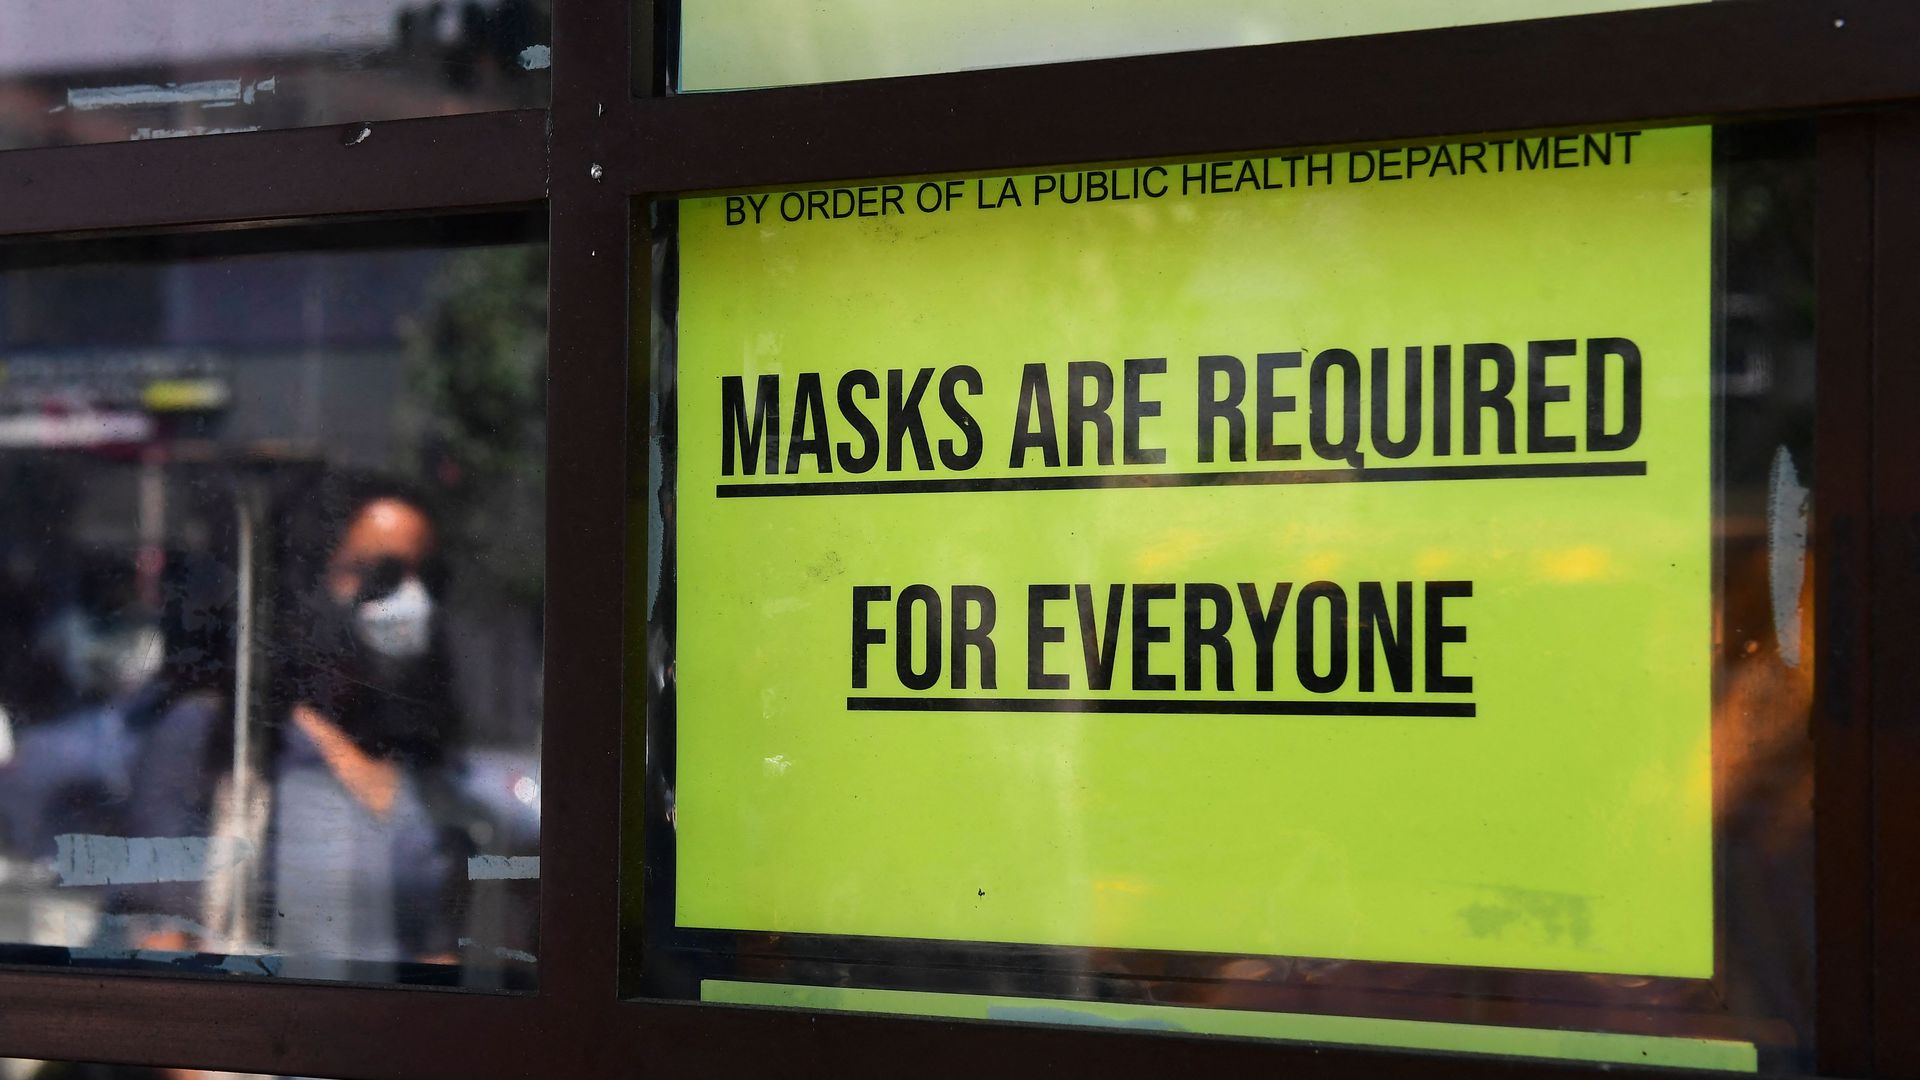 A storefront sign reminds people masks are for everyone on July 19, 2021 in Los Angeles, California.